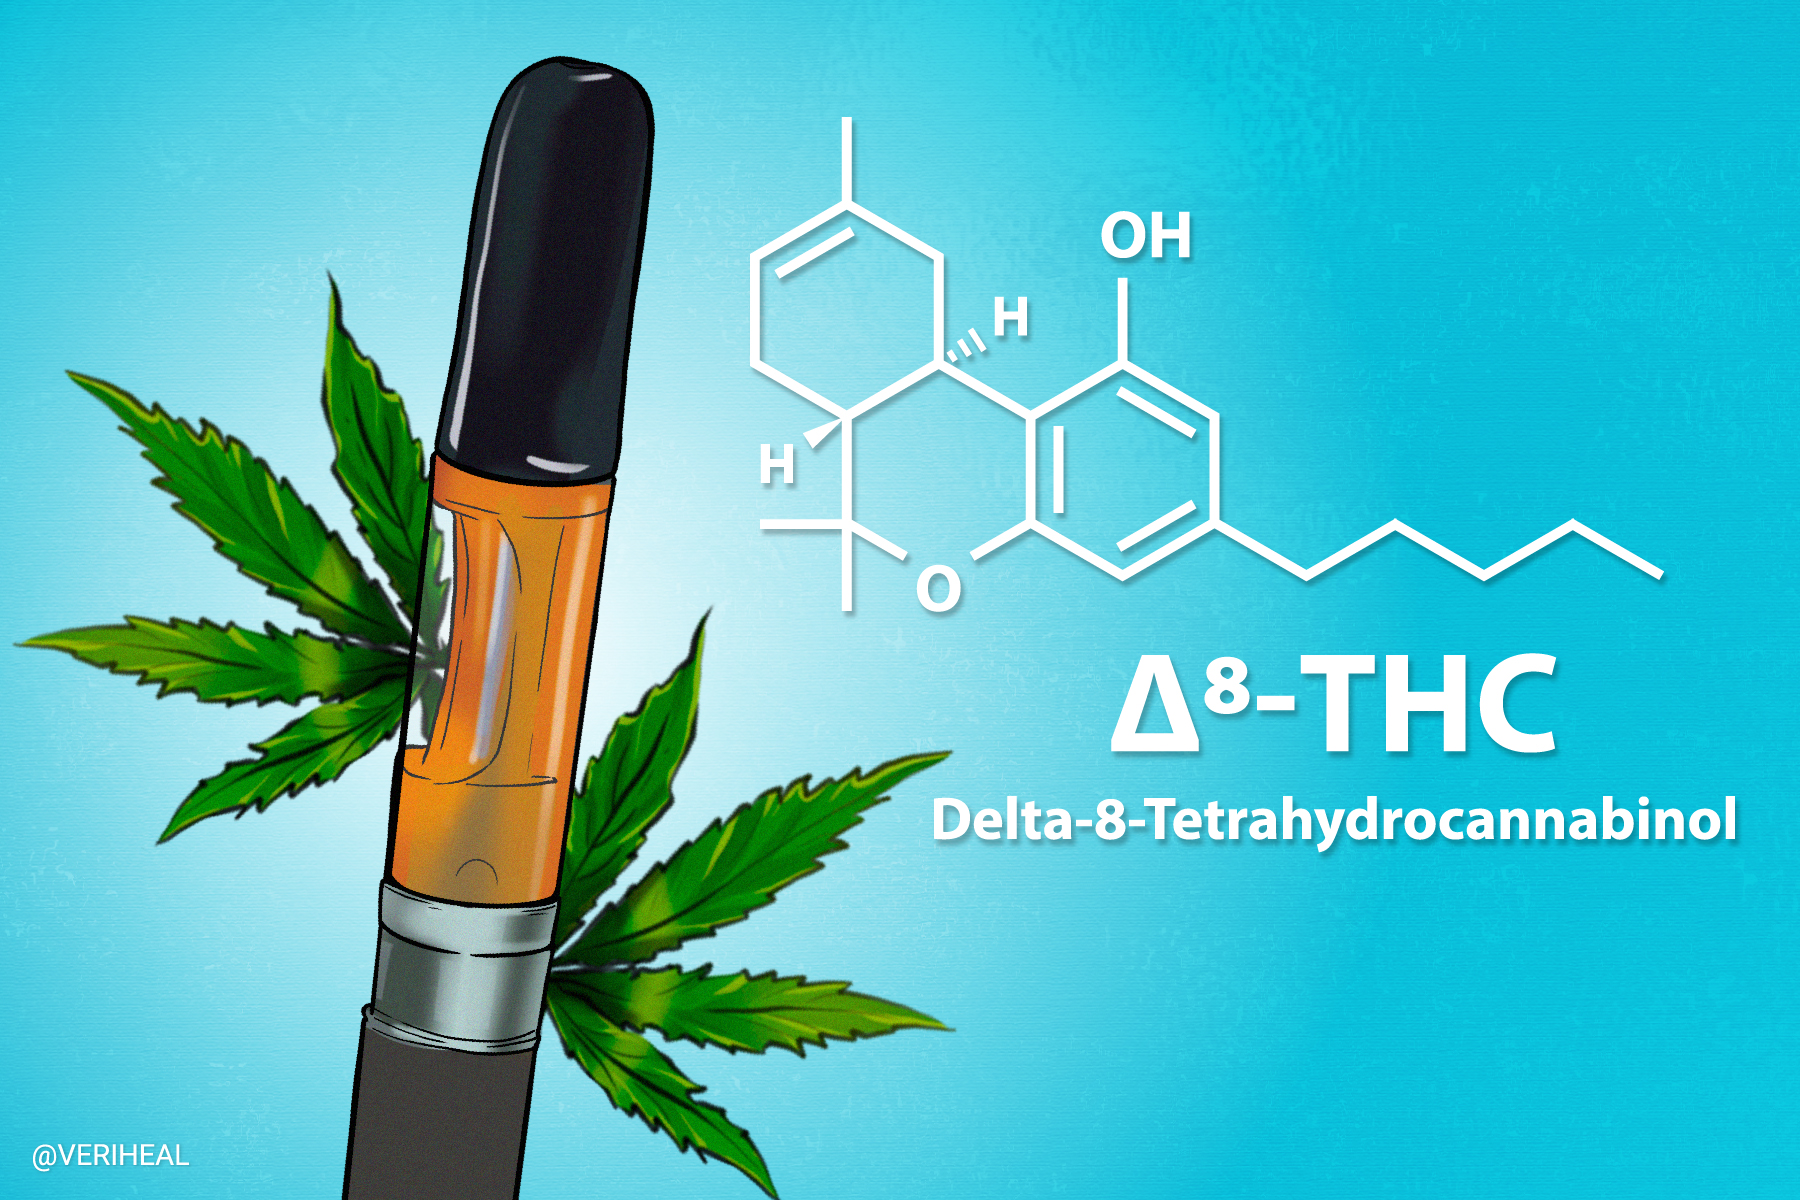 HOW IS DELTA 8 DISTILLATE MADE - Gummies|Thc|Products|Hemp|Product|Brand|Effects|Delta|Gummy|Cbd|Origin|Quality|Dosage|Delta-8|Dose|Usasource|Flavors|Brands|Ingredients|Range|Customers|Edibles|Cartridges|Reviews|Side|List|Health|Cannabis|Lab|Customer|Options|Benefits|Overviewproducts|Research|Time|Market|Drug|Farms|Party|People|Delta-8 Thc|Delta-8 Products|Delta-9 Thc|Delta-8 Gummies|Delta-8 Thc Products|Delta-8 Brands|Customer Reviews|Brand Overviewproducts|Drug Tests|Free Shipping|Similar Benefits|Vape Cartridges|Hemp Doctor|United States|Third Party Lab|Drug Test|Thc Edibles|Health Canada|Cannabis Plant|Side Effects|Organic Hemp|Diamond Cbd|Reaction Time|Legal Hemp|Psychoactive Effects|Psychoactive Properties|Third Party|Dry Eyes|Delta-8 Market|Tolerance Level